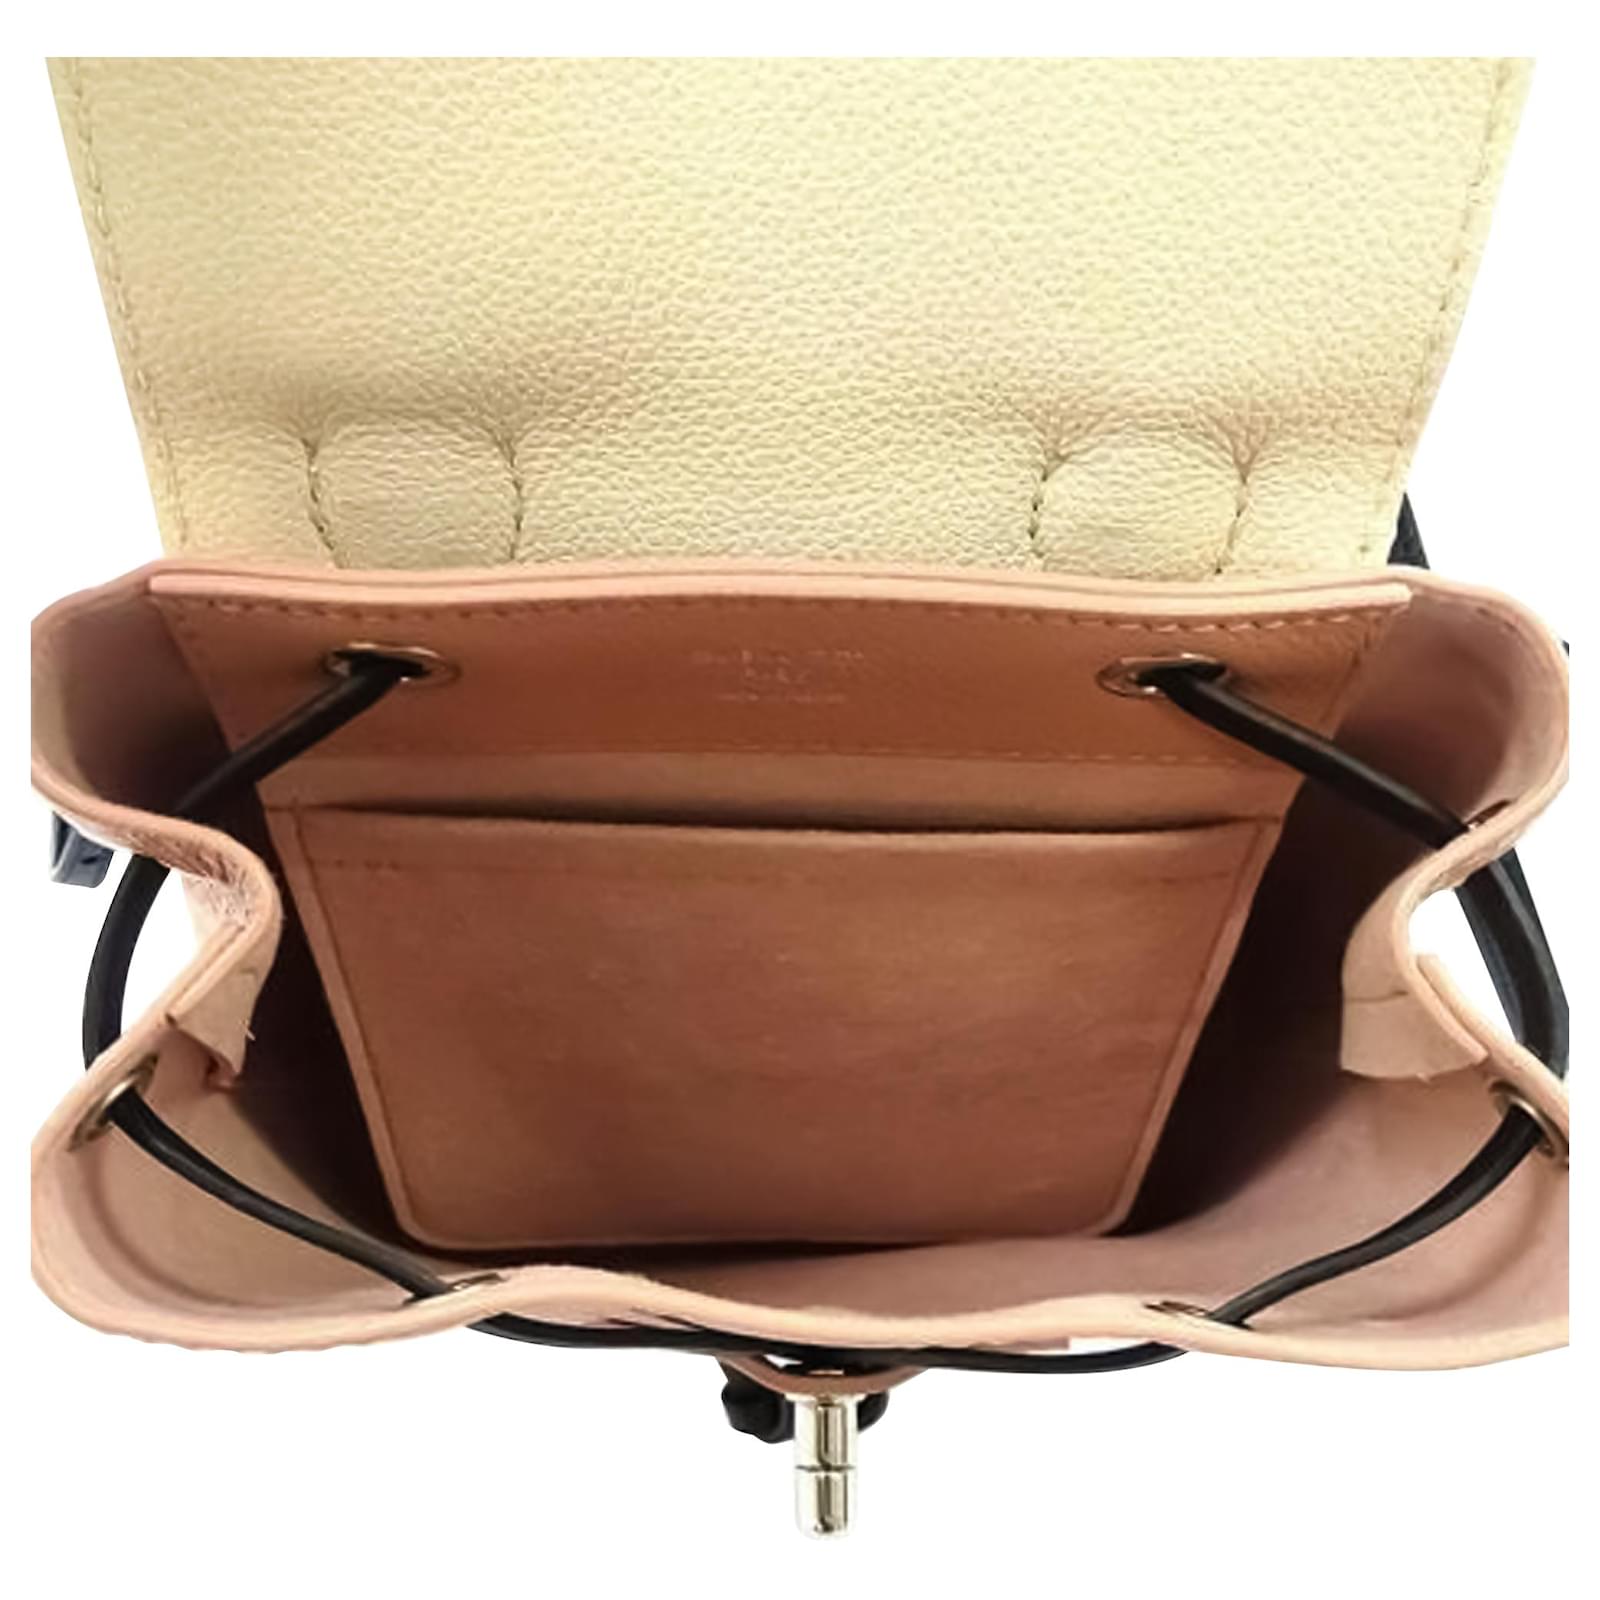 Louis Vuitton Pink Mini Lockme Backpack Leather Pony-style